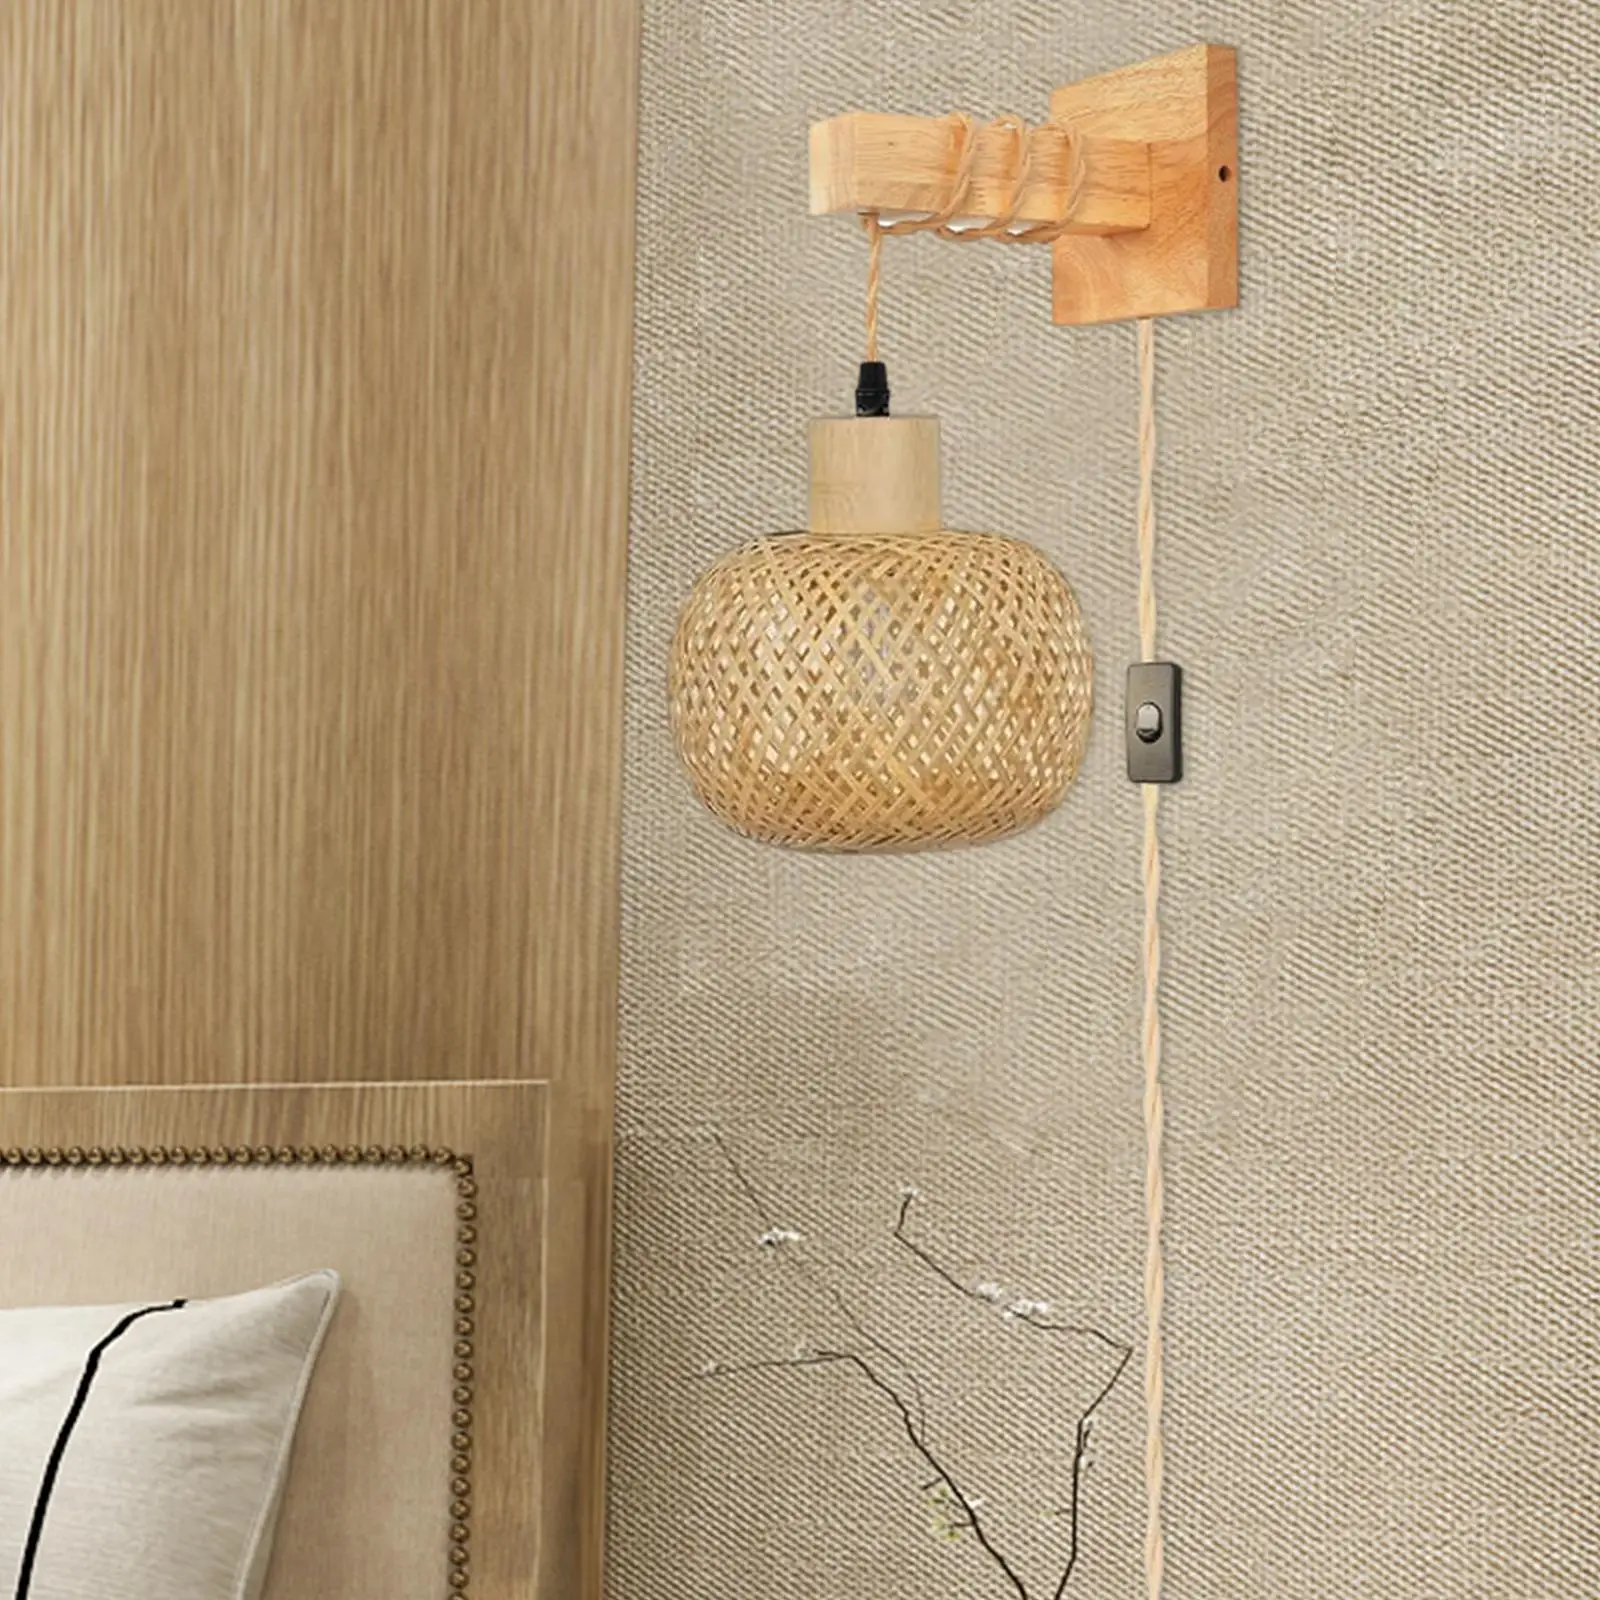 Bamboo Wall Sconce E26 Base Wall Mount Sconce Hand Woven Farmhouse Hanging Lamp for Bedroom Corridor Bathroom Kitchen Stairs